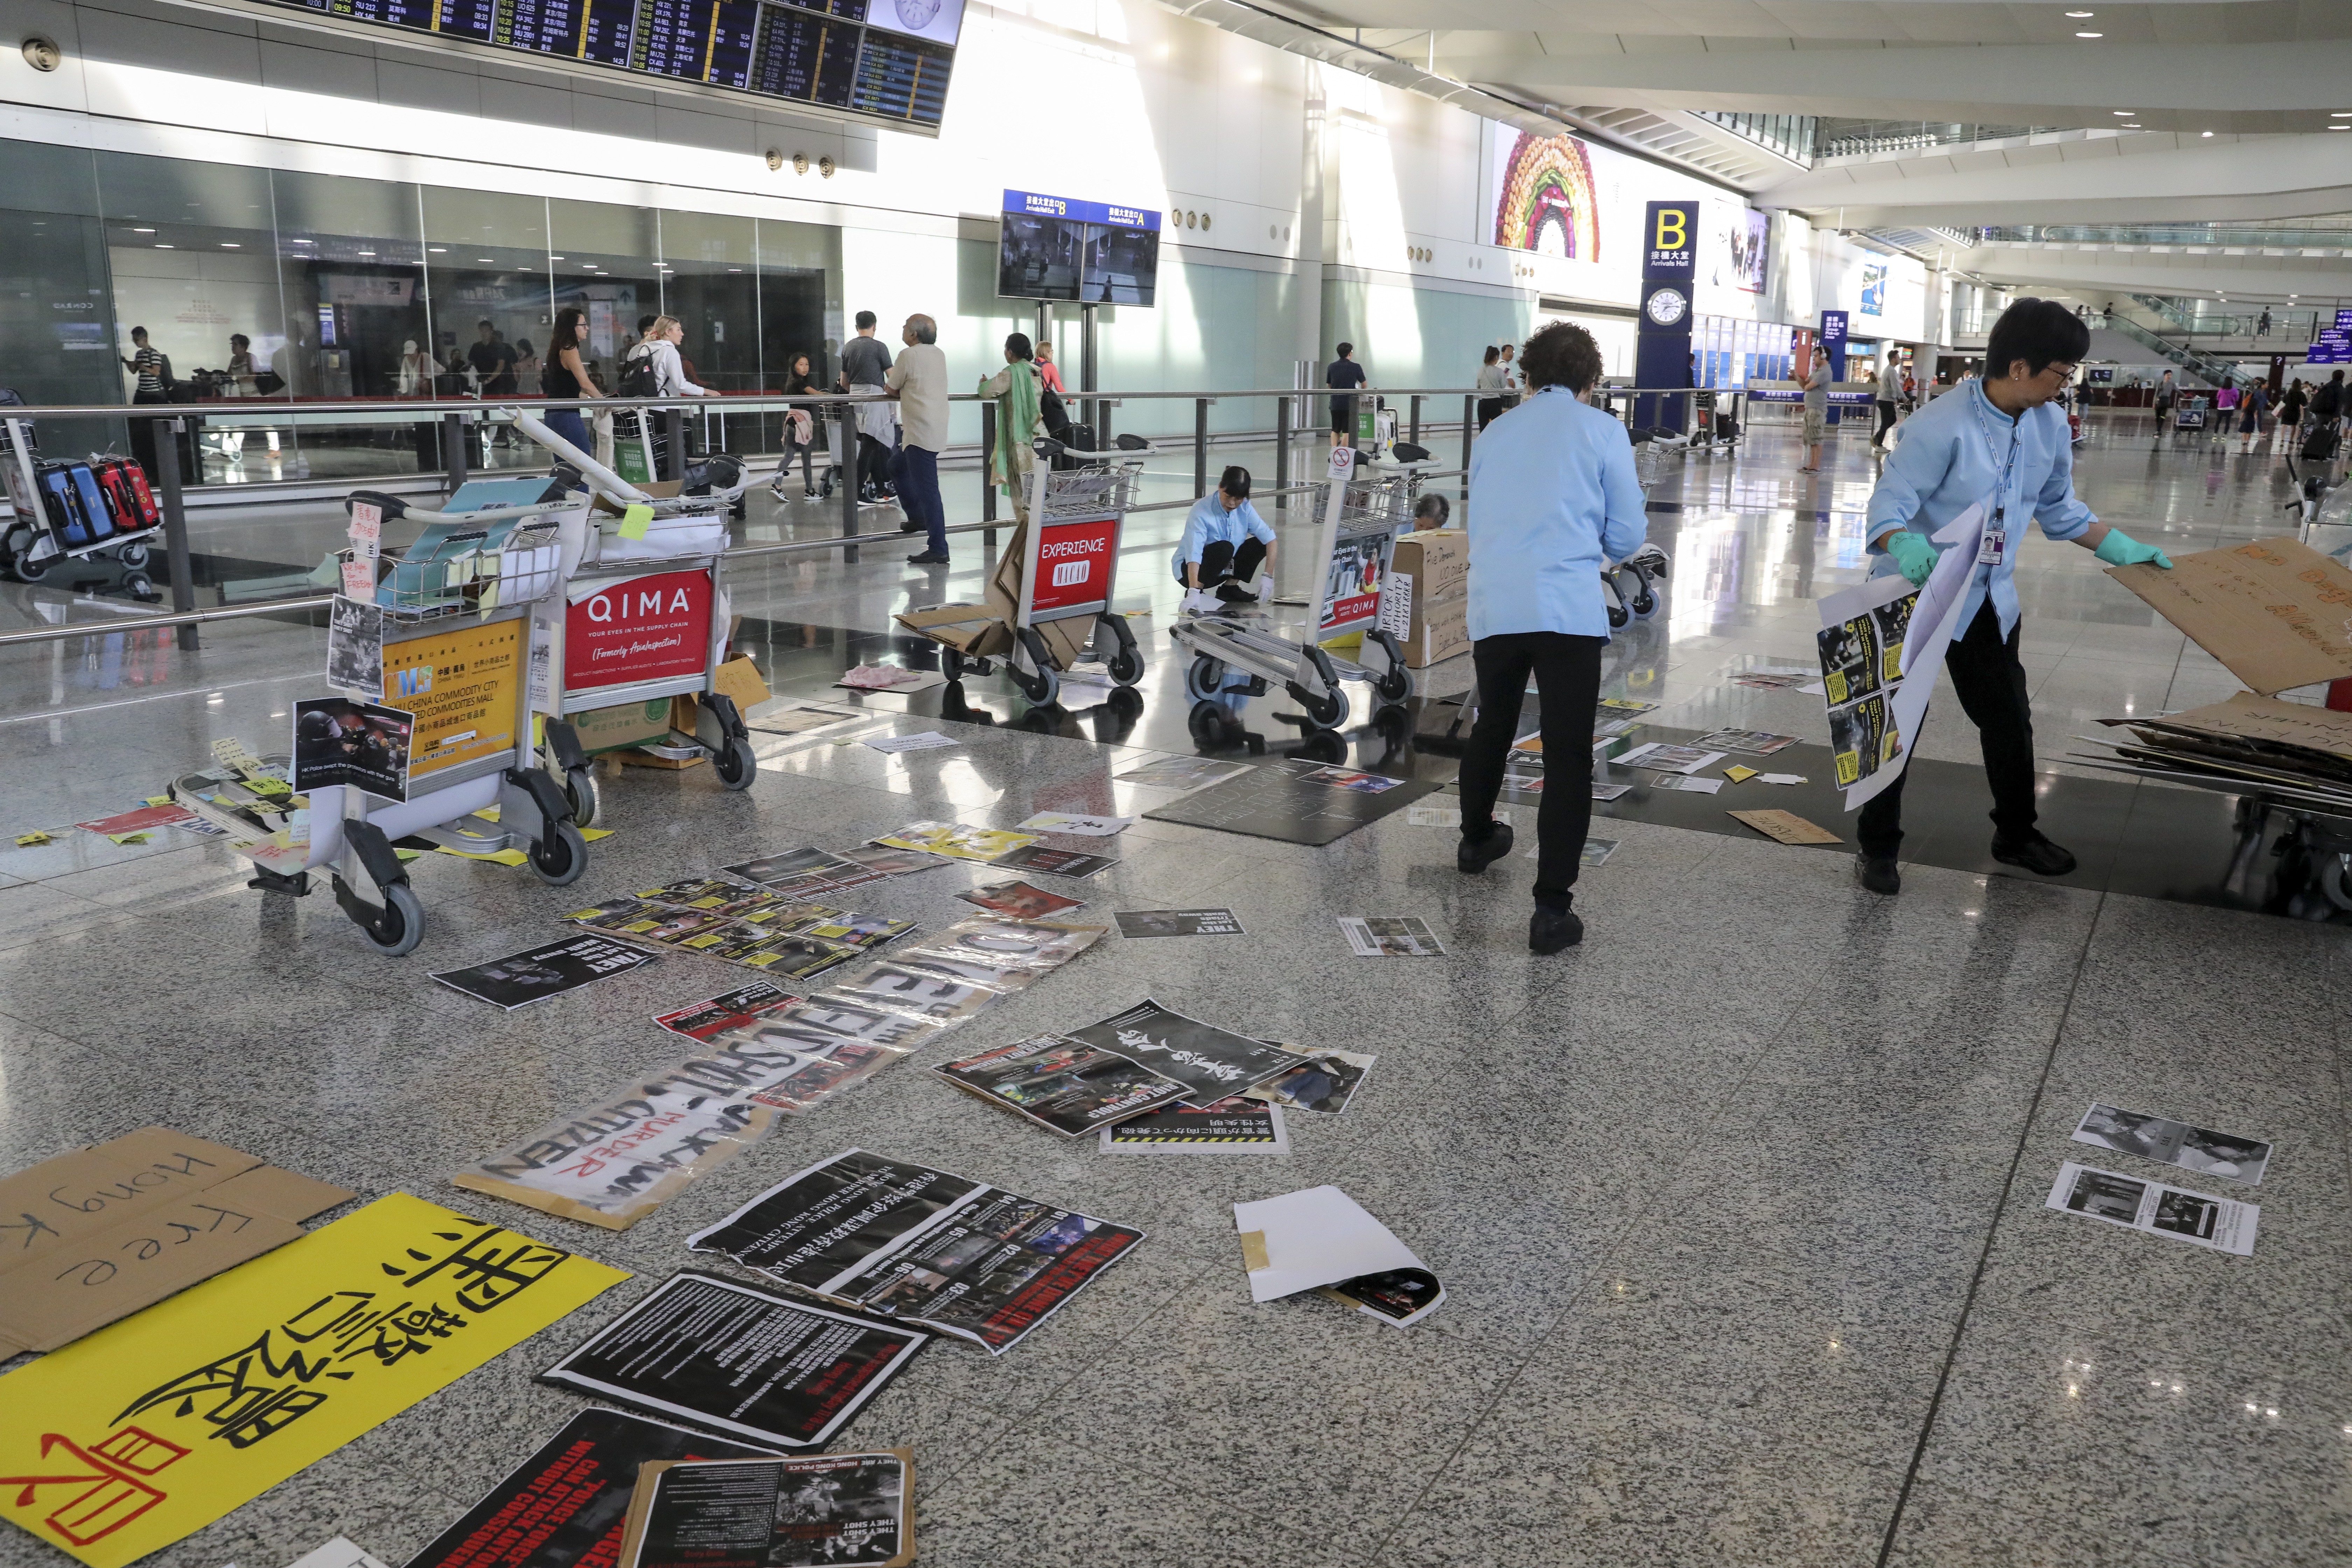 Cleaners remove what remains of the protest paraphernalia at the airport. Photo: Dickson Lee